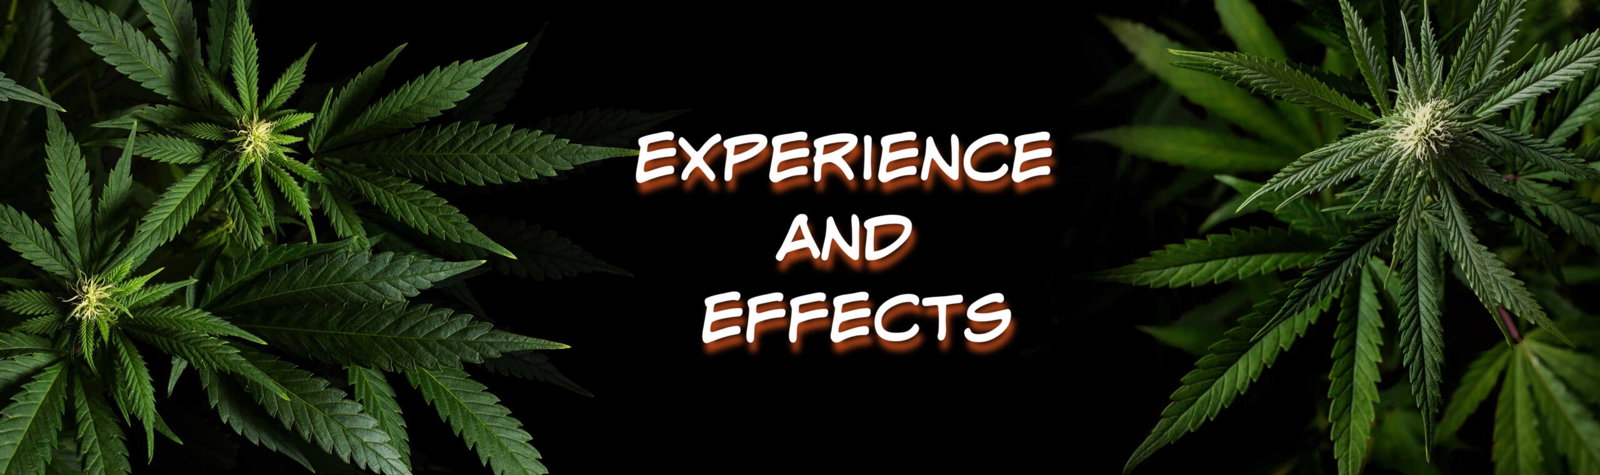 image of berry white experience and effects